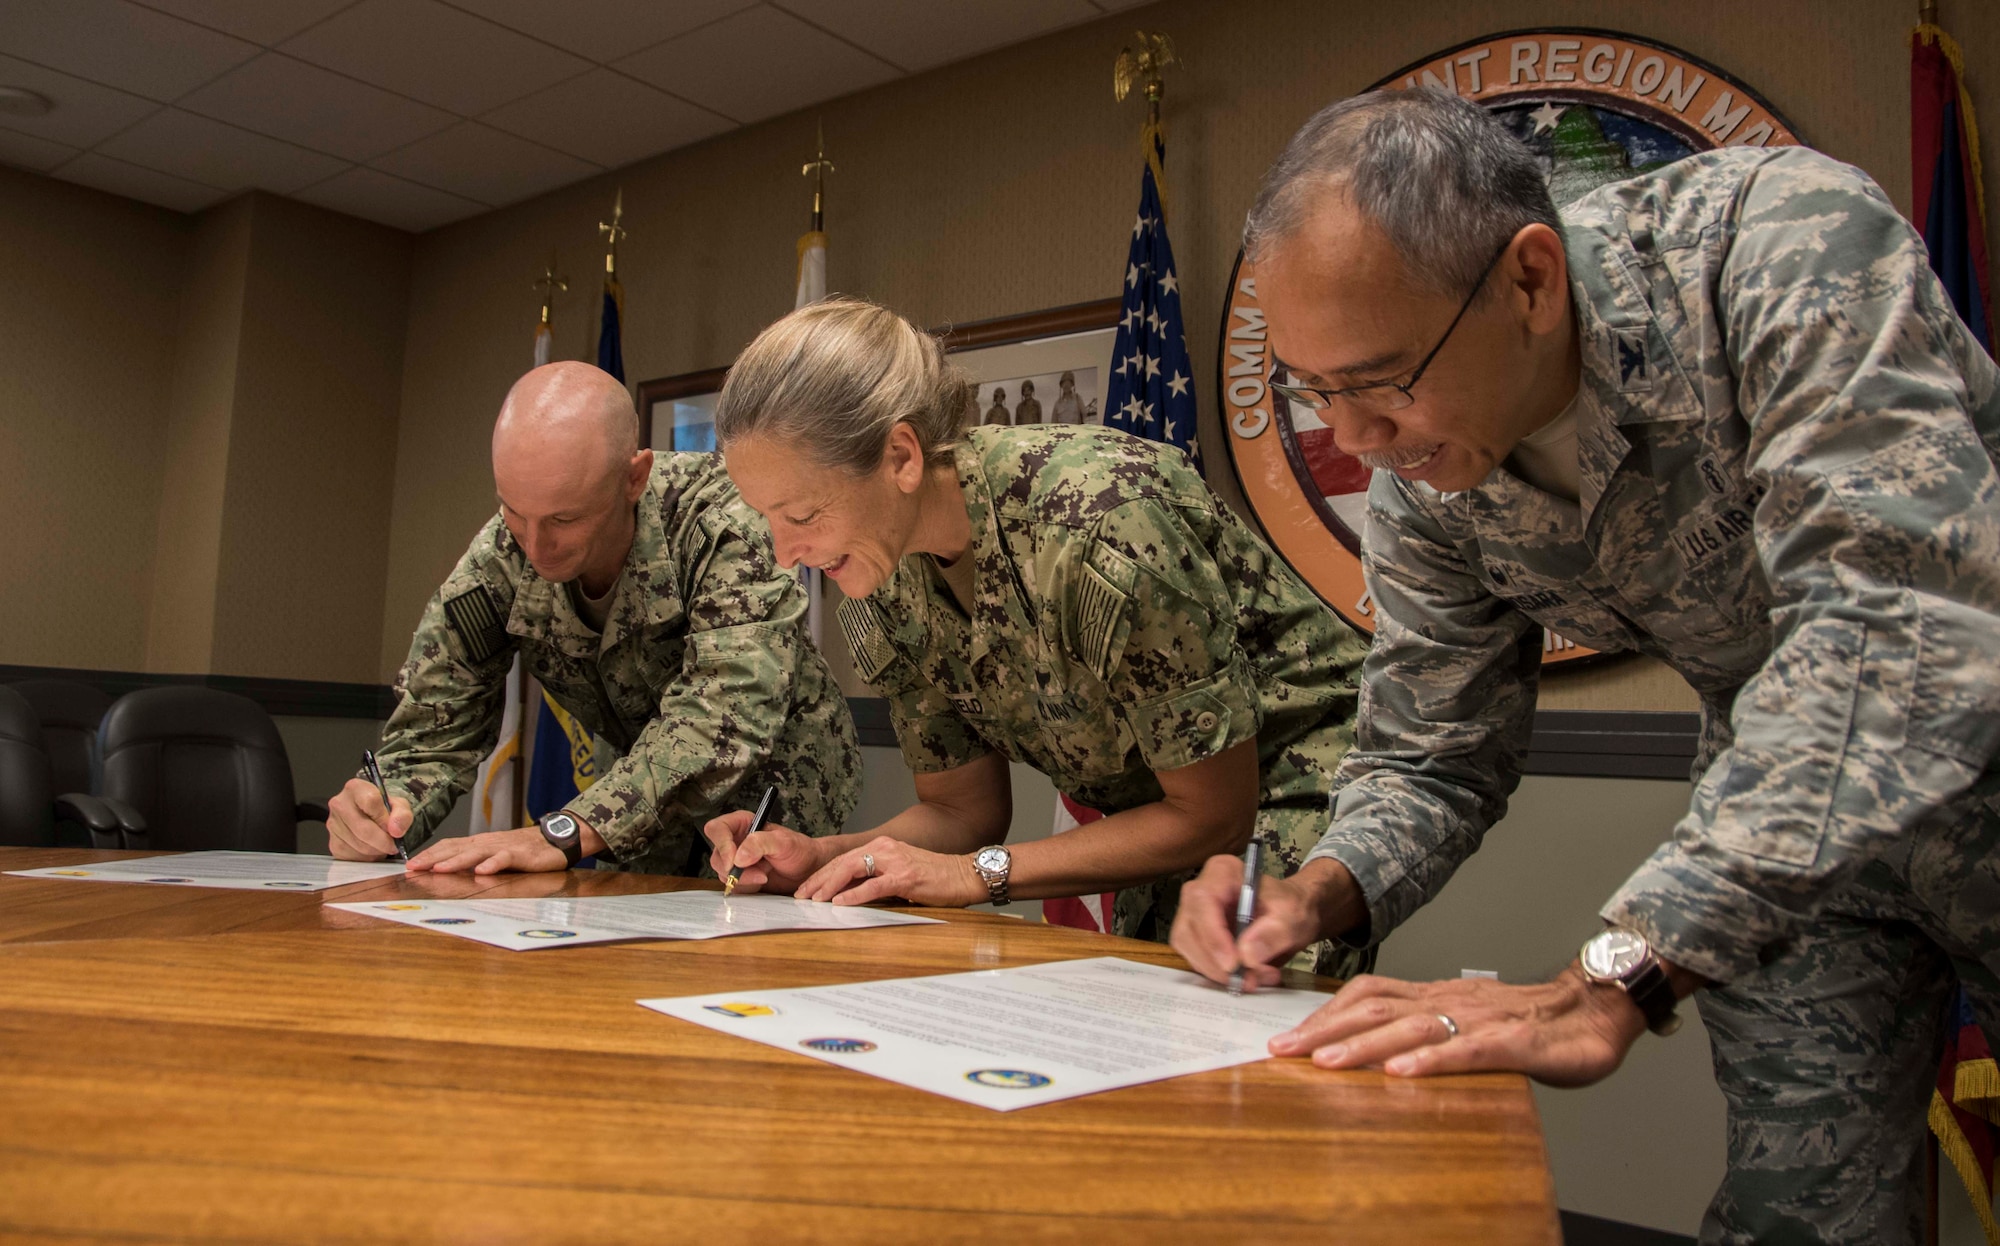 From left, U.S. Navy Capt. Hans Sholley, Naval Base Guam commanding officer, U.S. Navy Rear Adm. Shoshana Chatfield, Joint Region Marianas (JRM) commander and U.S. Air Force Col. Joel Almosara, 36th Medical Group commander, sign the Domestic Violence Awareness Month proclamation at JRM headquarters in Asan, Guam, Oct. 2, 2017. Domestic violence is an offense under the United States Code, the Uniform Code of Military Justice and state law. Regulations require military and Department of Defense officials to report any suspicion of family violence. This includes commanders, first sergeants, supervisors, medical personnel and military police. (U.S. Navy photo by JoAnna Delfin)